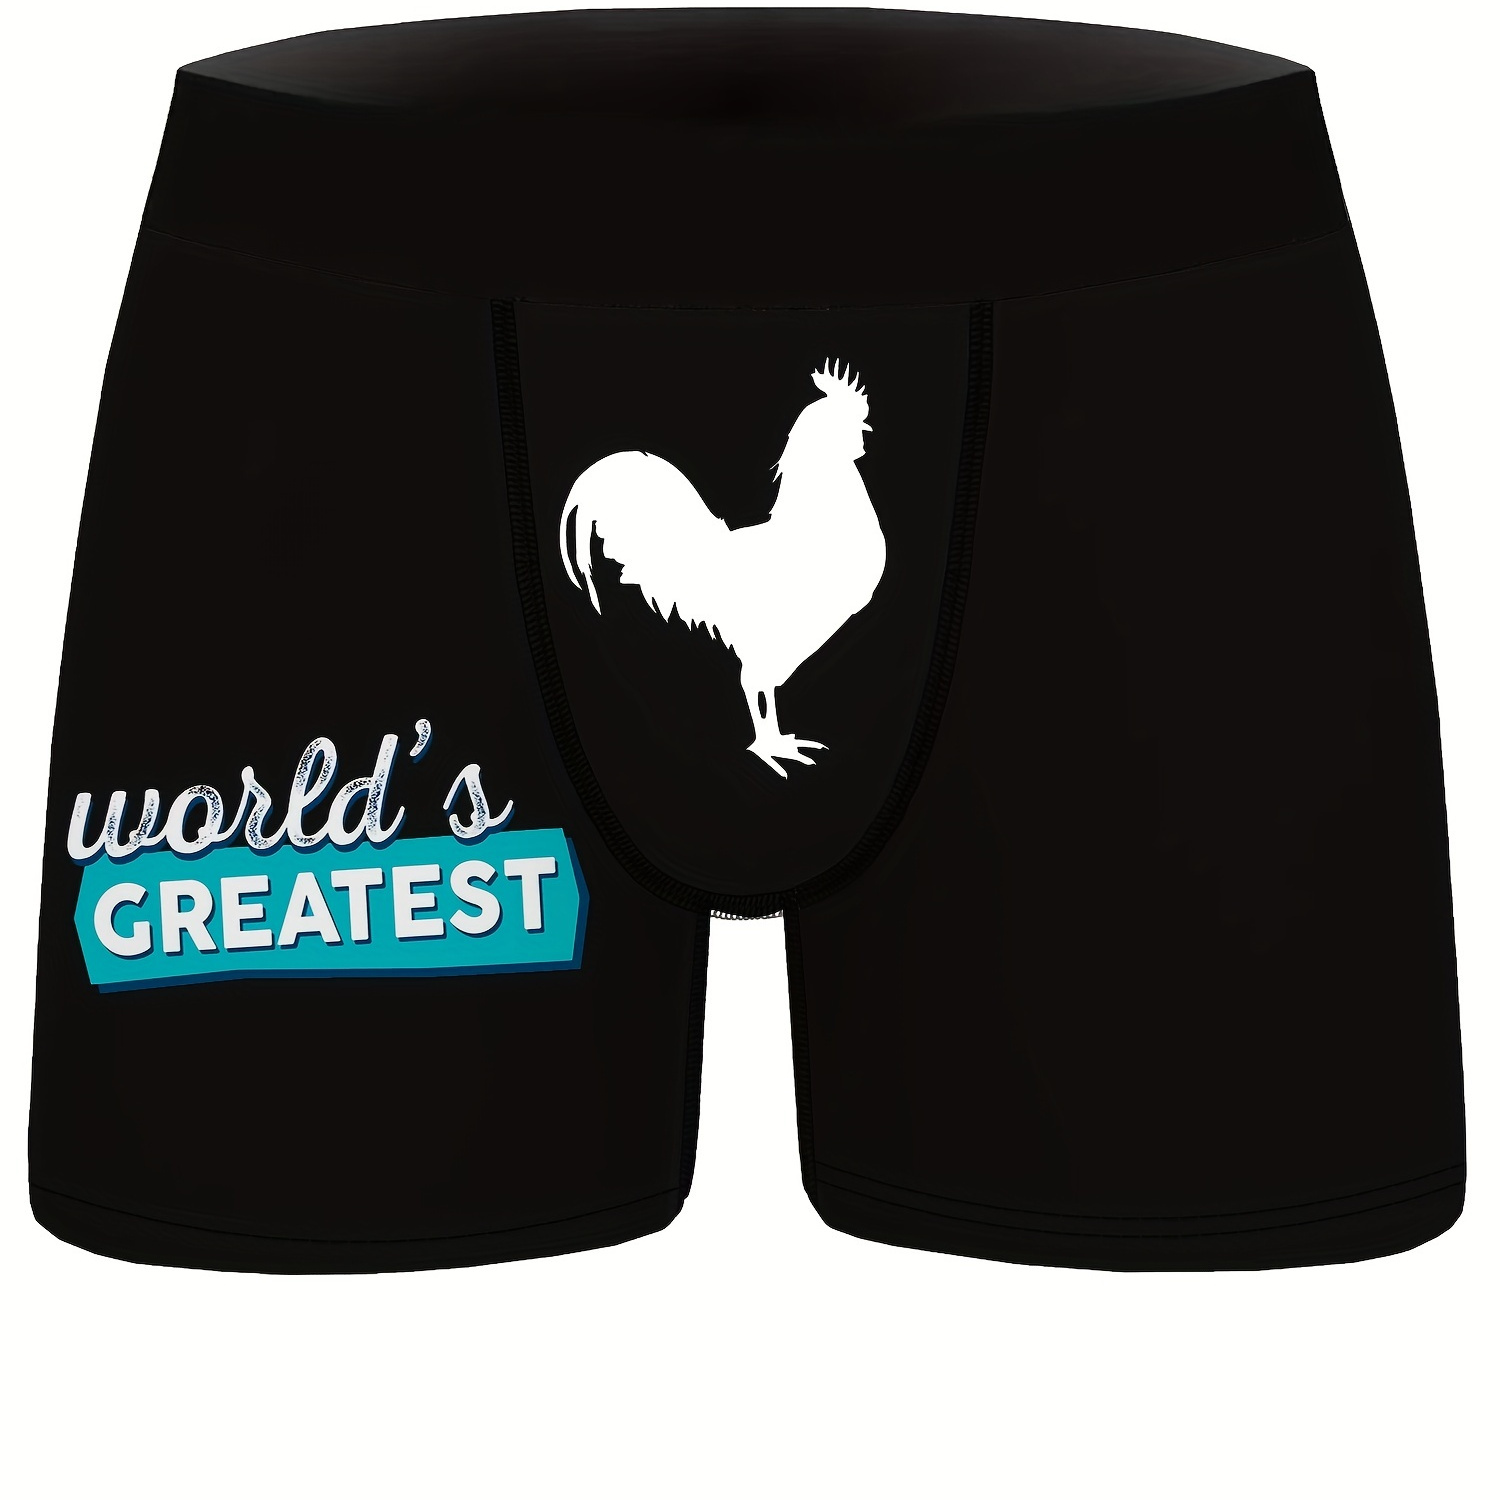 

Men's Cartoon Rooster Print Fashion Novelty Boxer Briefs Shorts, Breathable Comfy High Stretch Boxer Panties Underwear